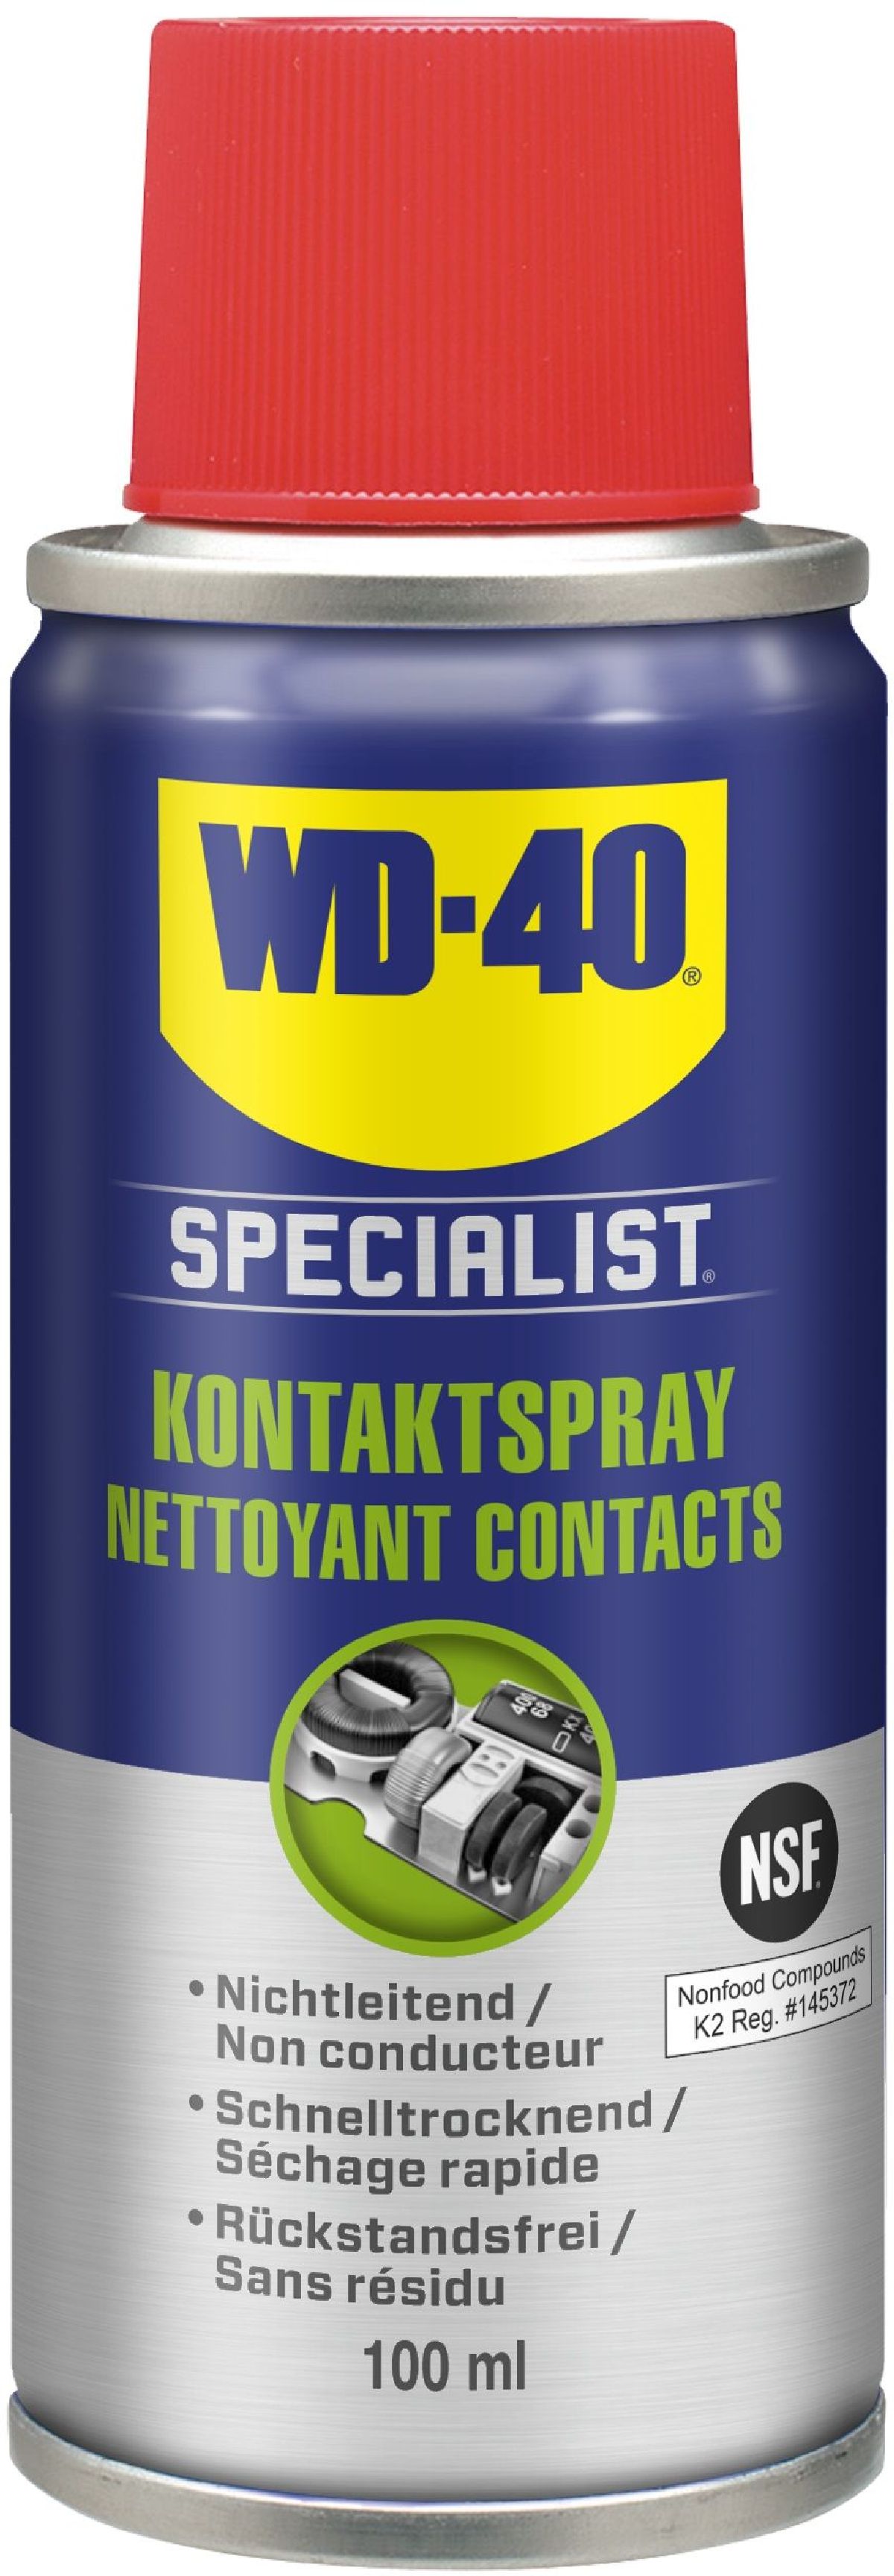 WD-40 Specialist Nettoyant Contacts 